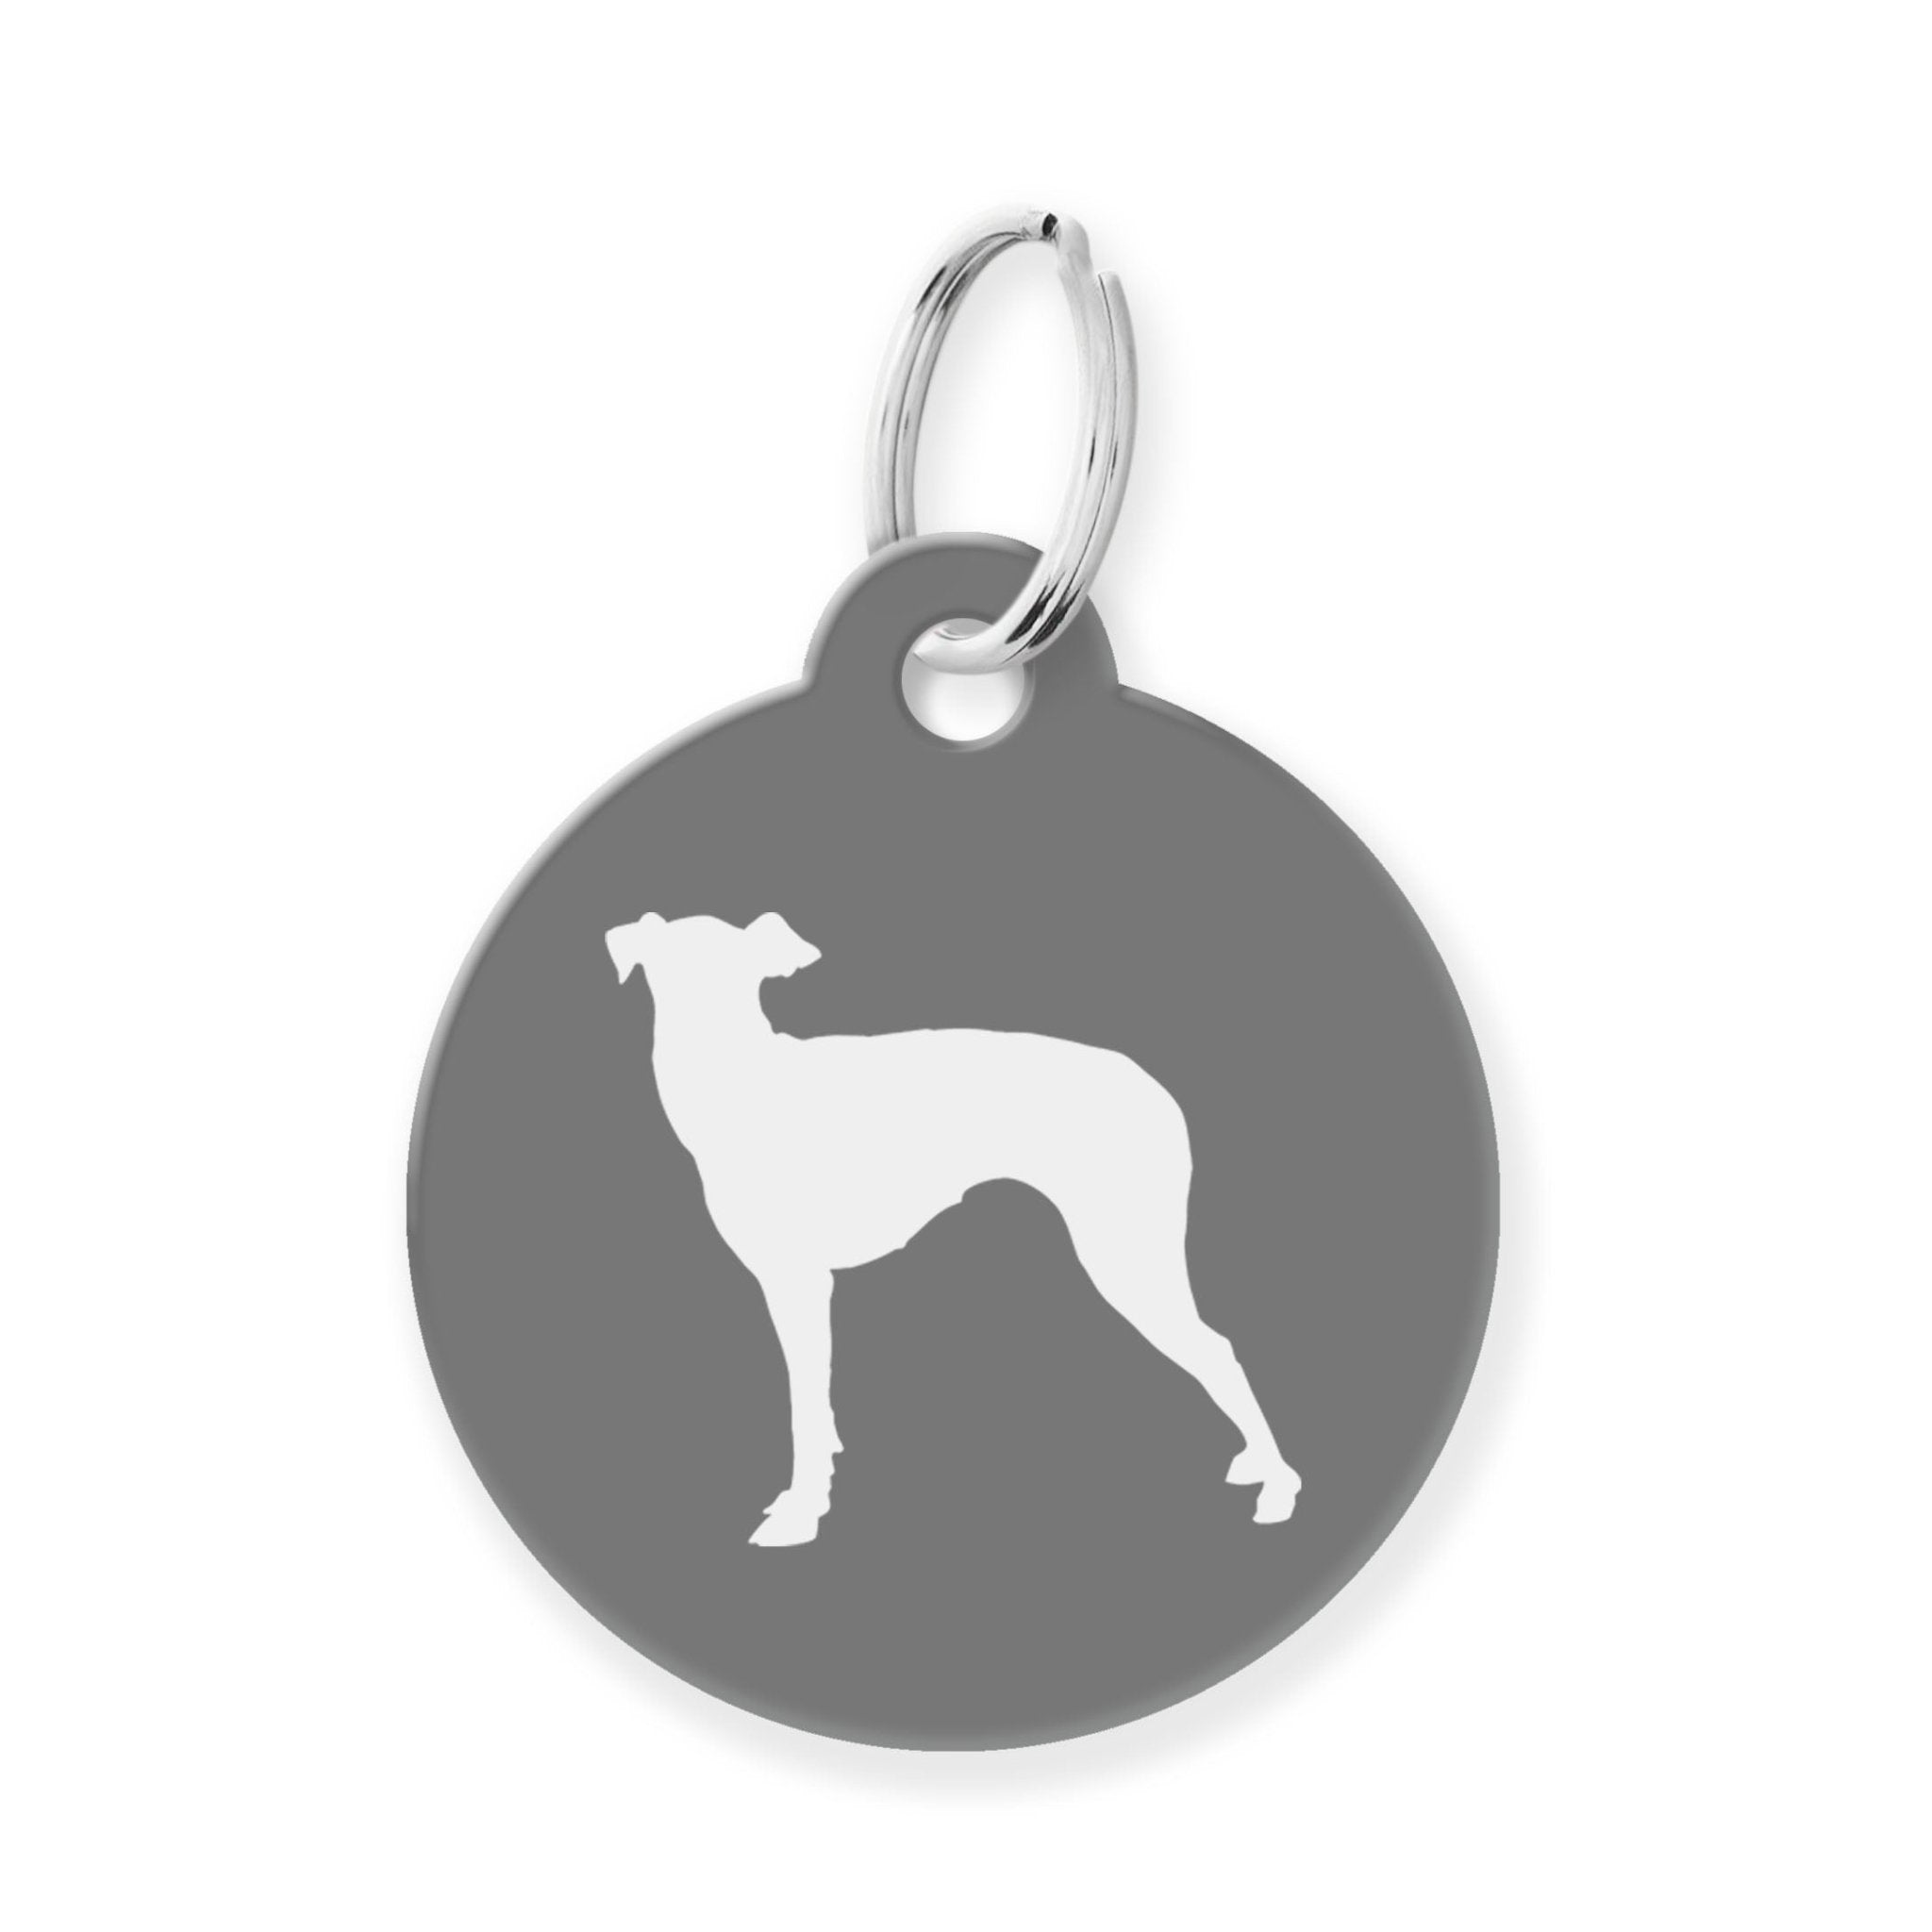 Greyhound Silhouette Pet Tag - The Barking Mutt